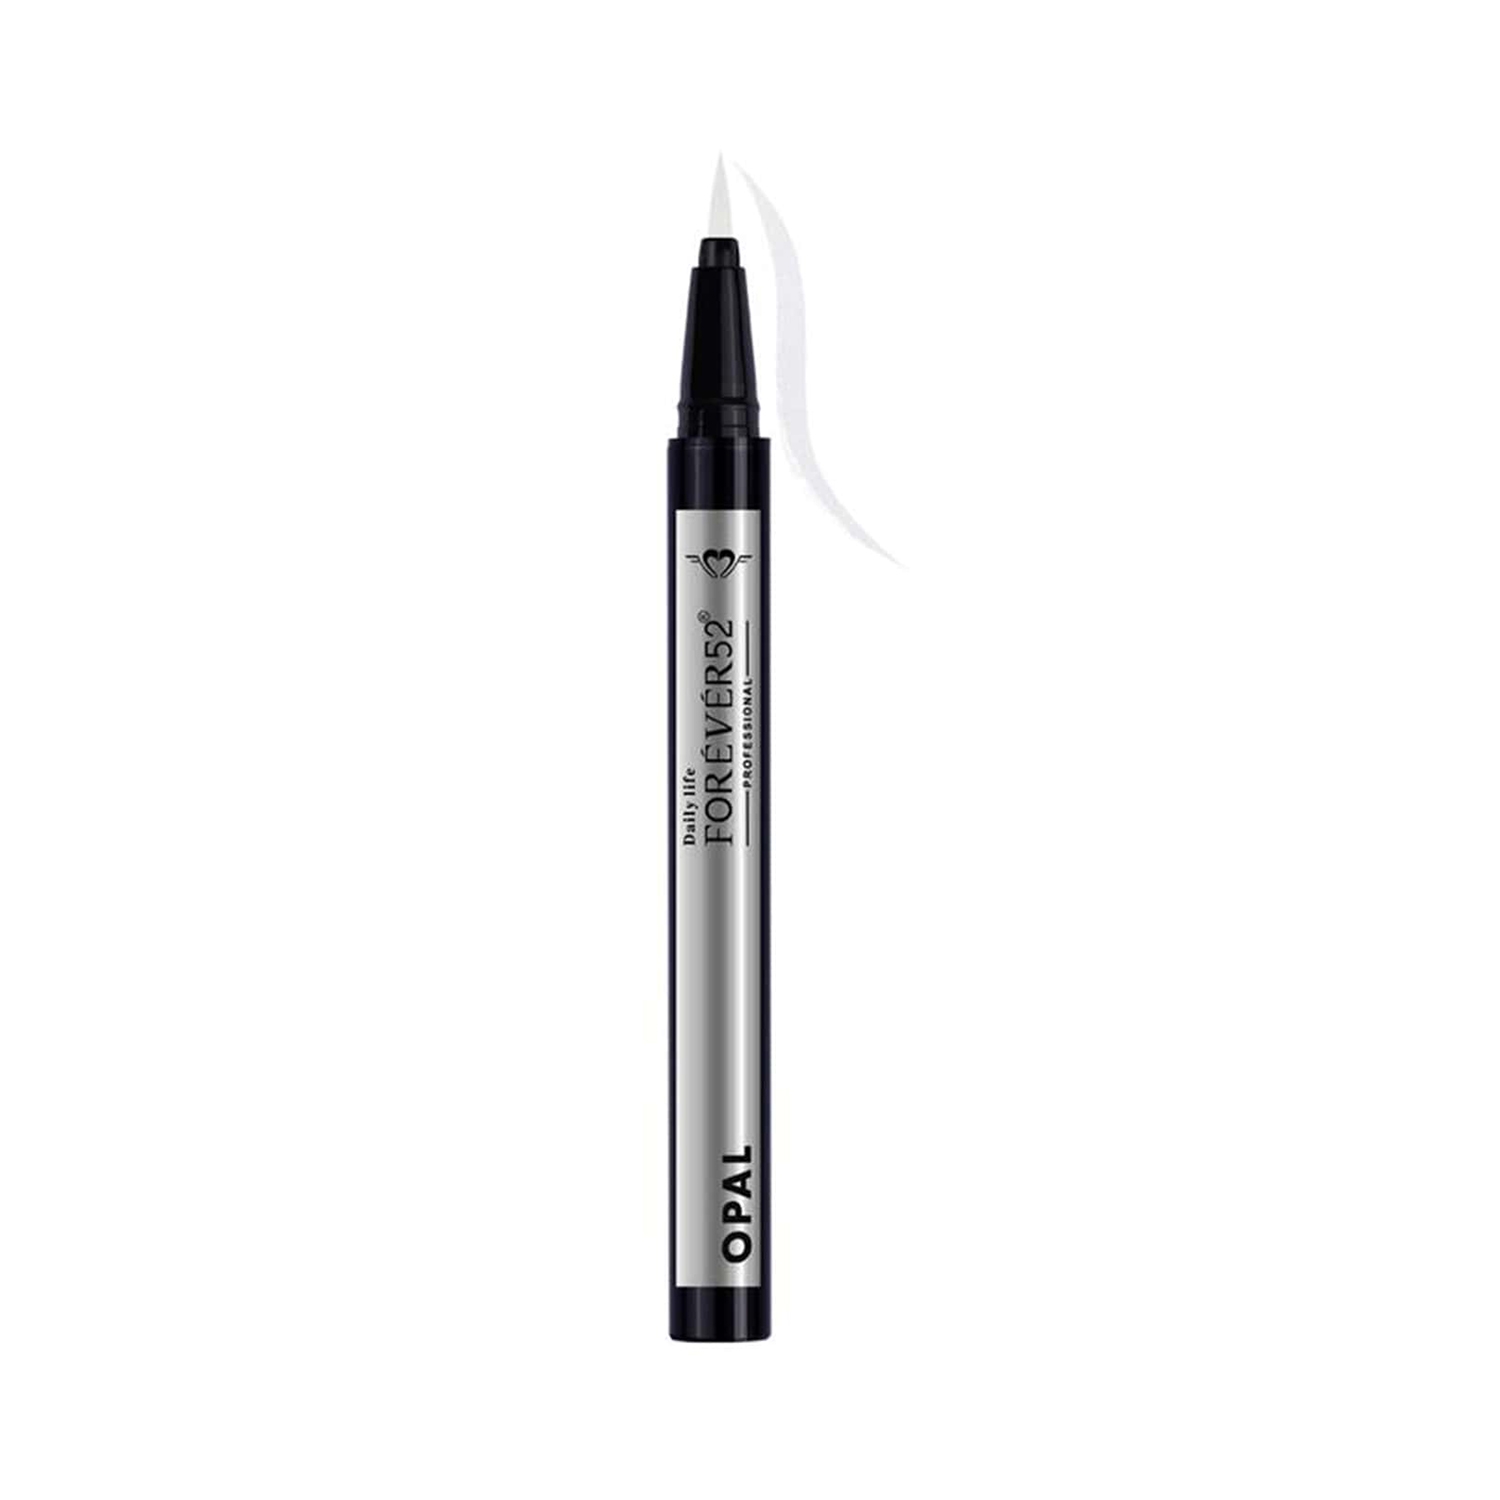 Daily Life Forever52 | Daily Life Forever52 Glitz Waterproof Eyeliner Eyeshadow - Opal (0.6g)